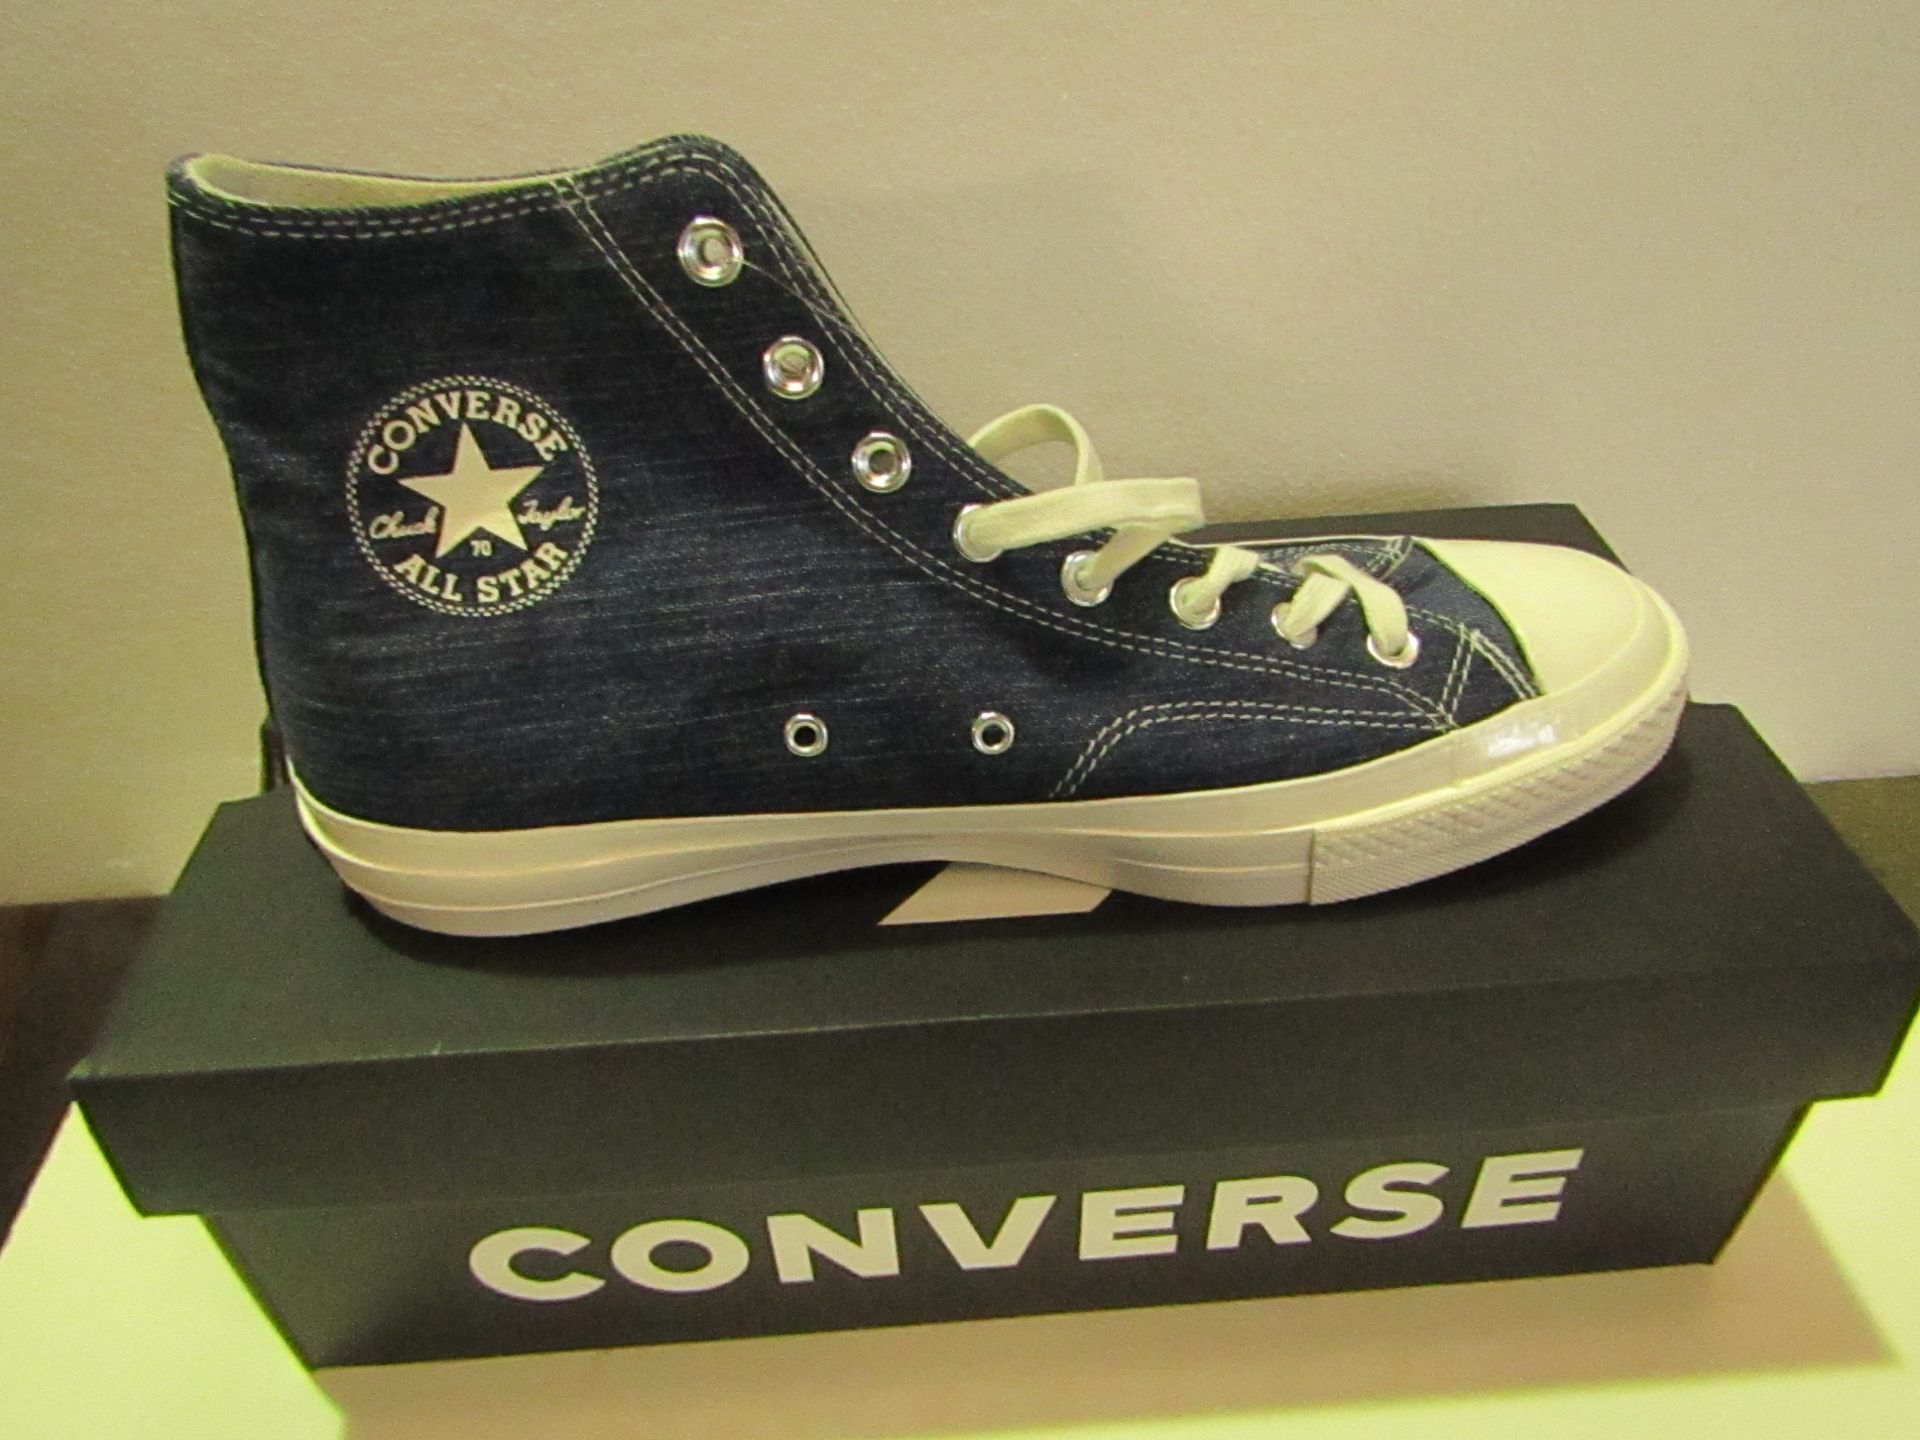 Converse All Star Navy Canvas Trainer size UK 12 new & boxed see image for design